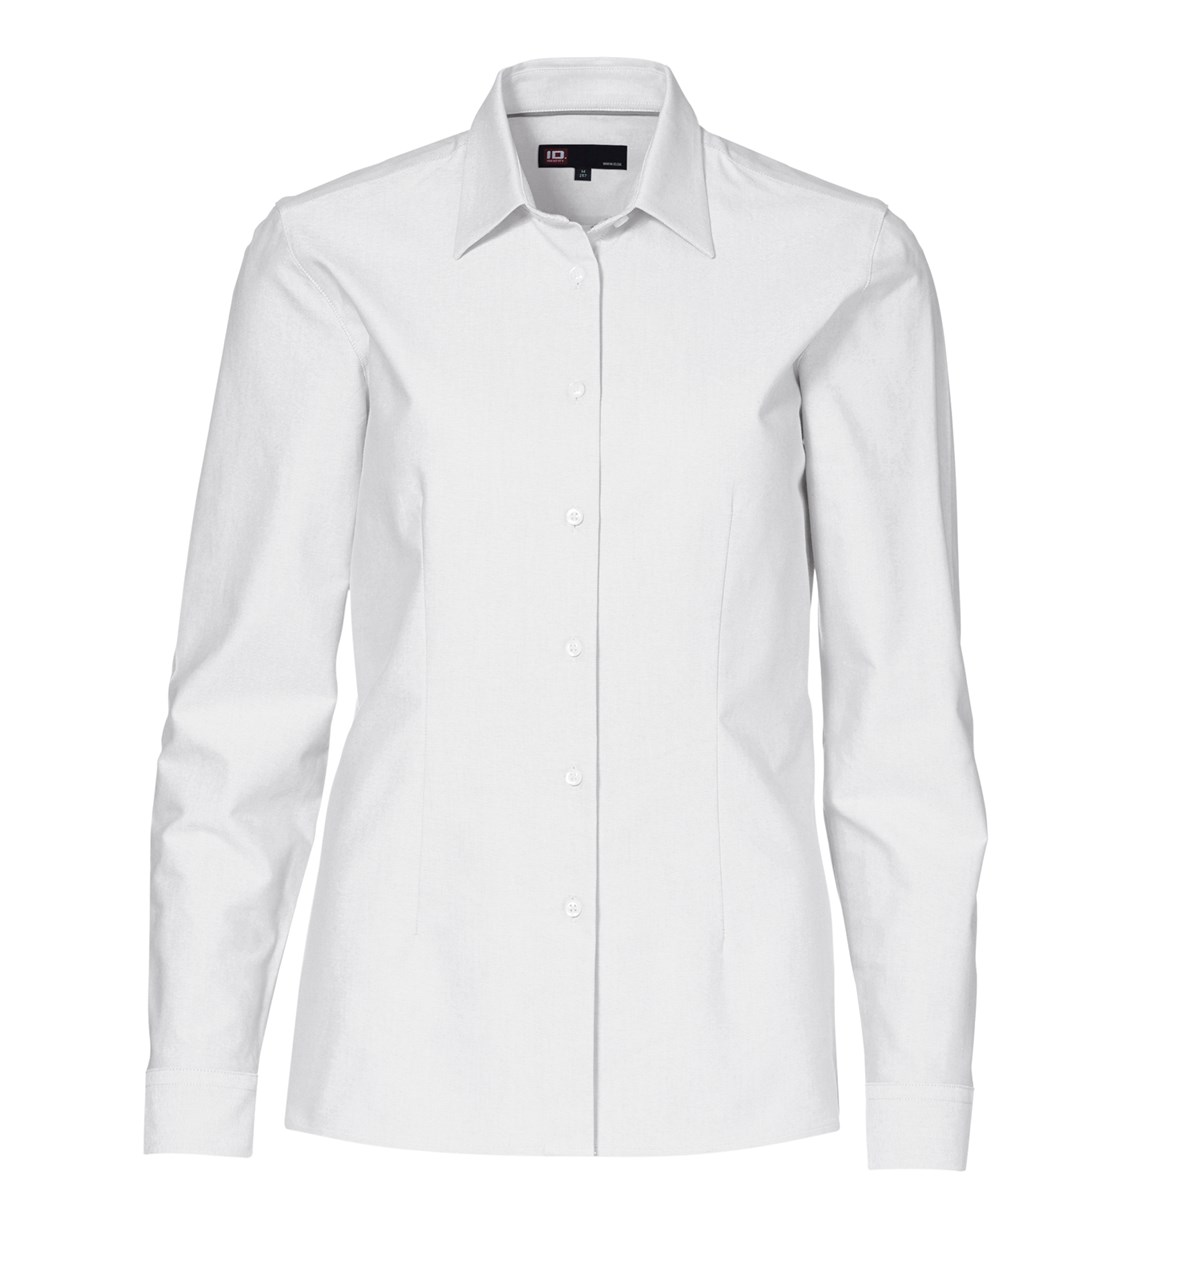 Picture of Ladies Oxford shirt